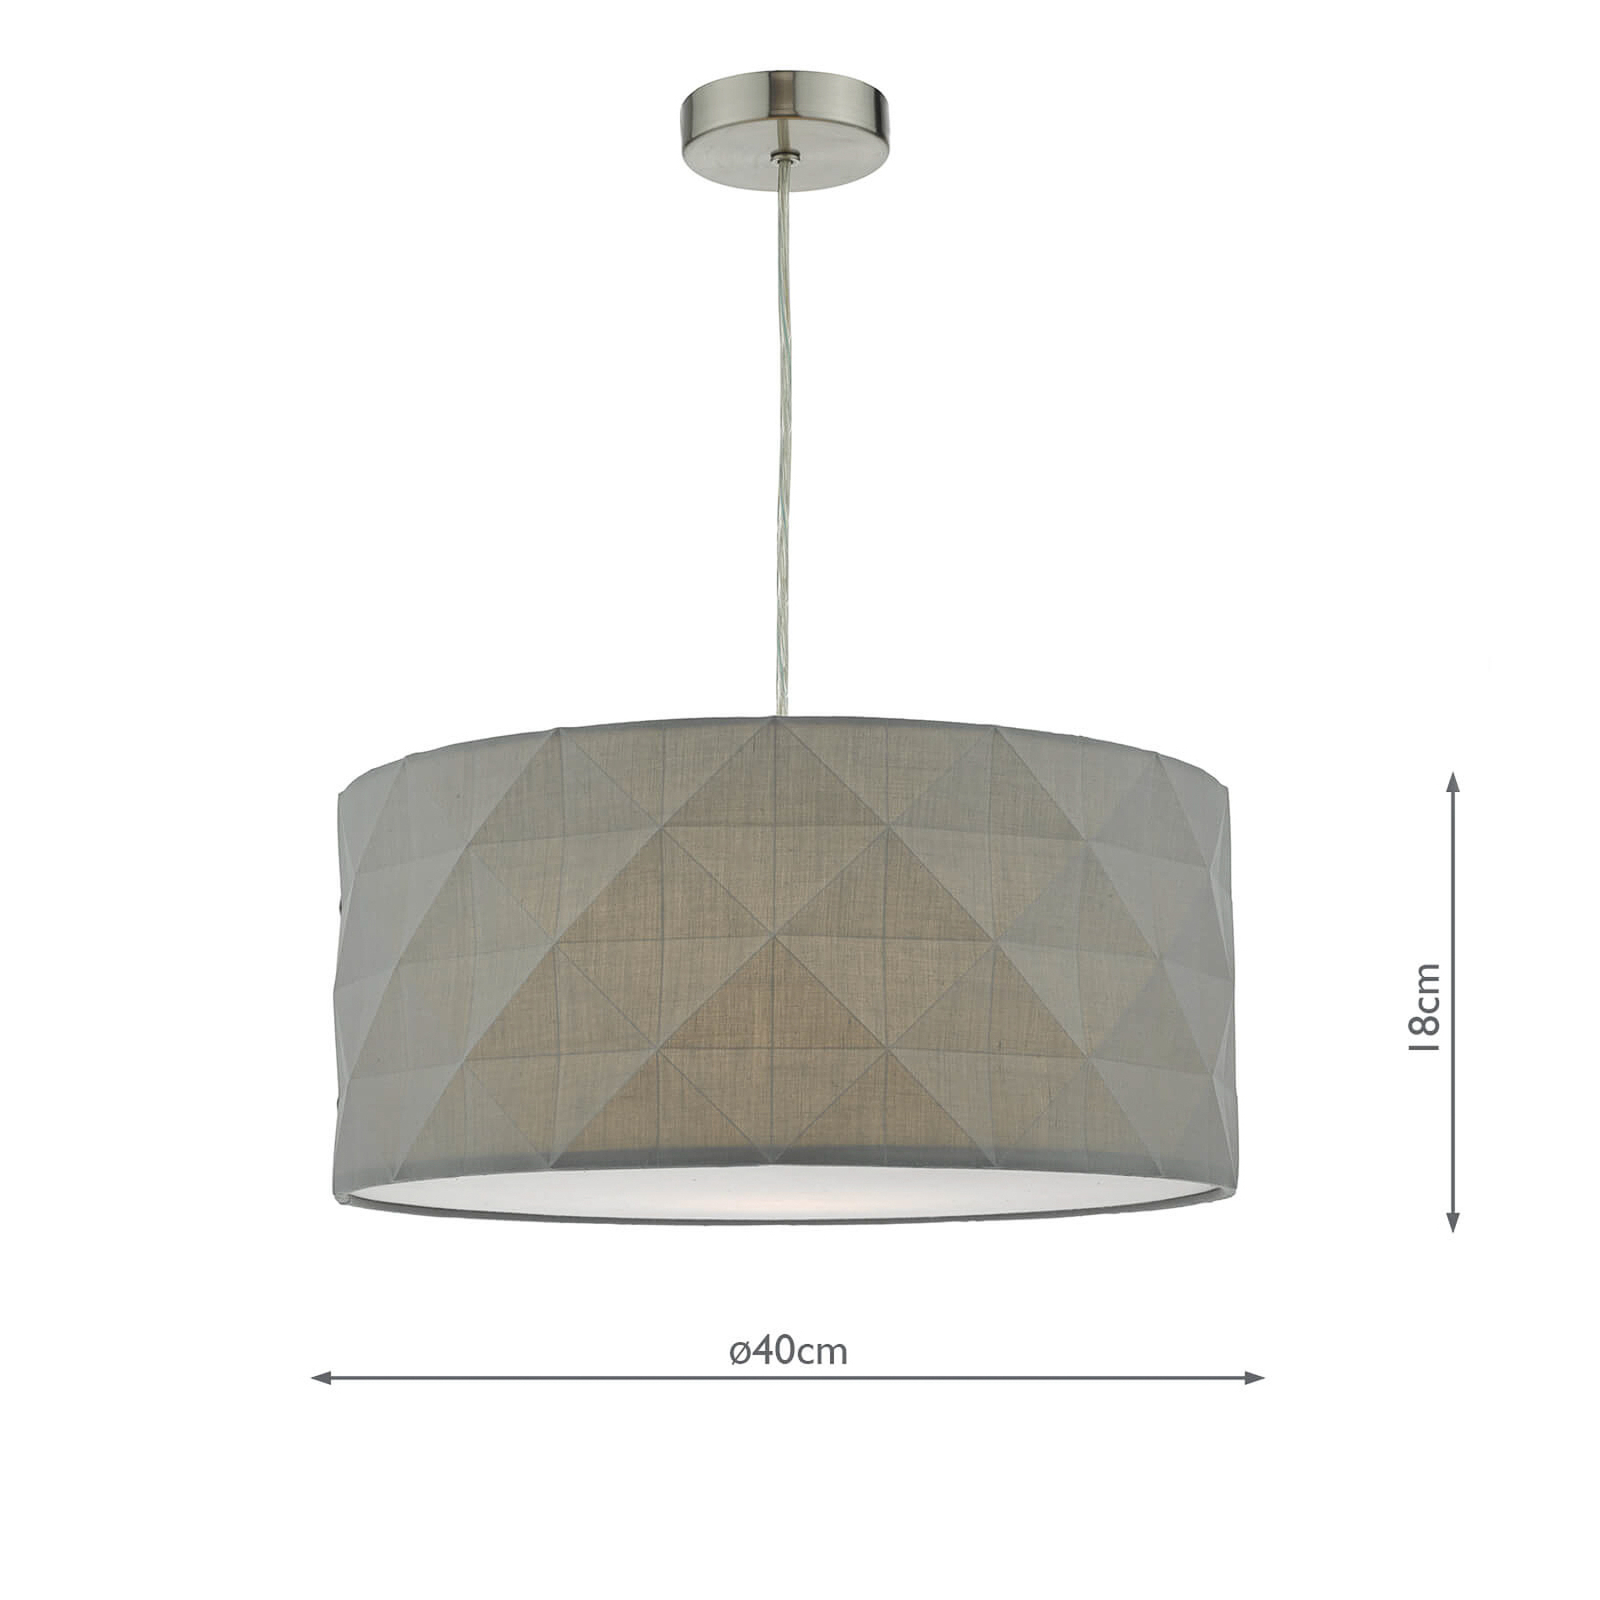 Aisha pendant light in grey with cotton shade